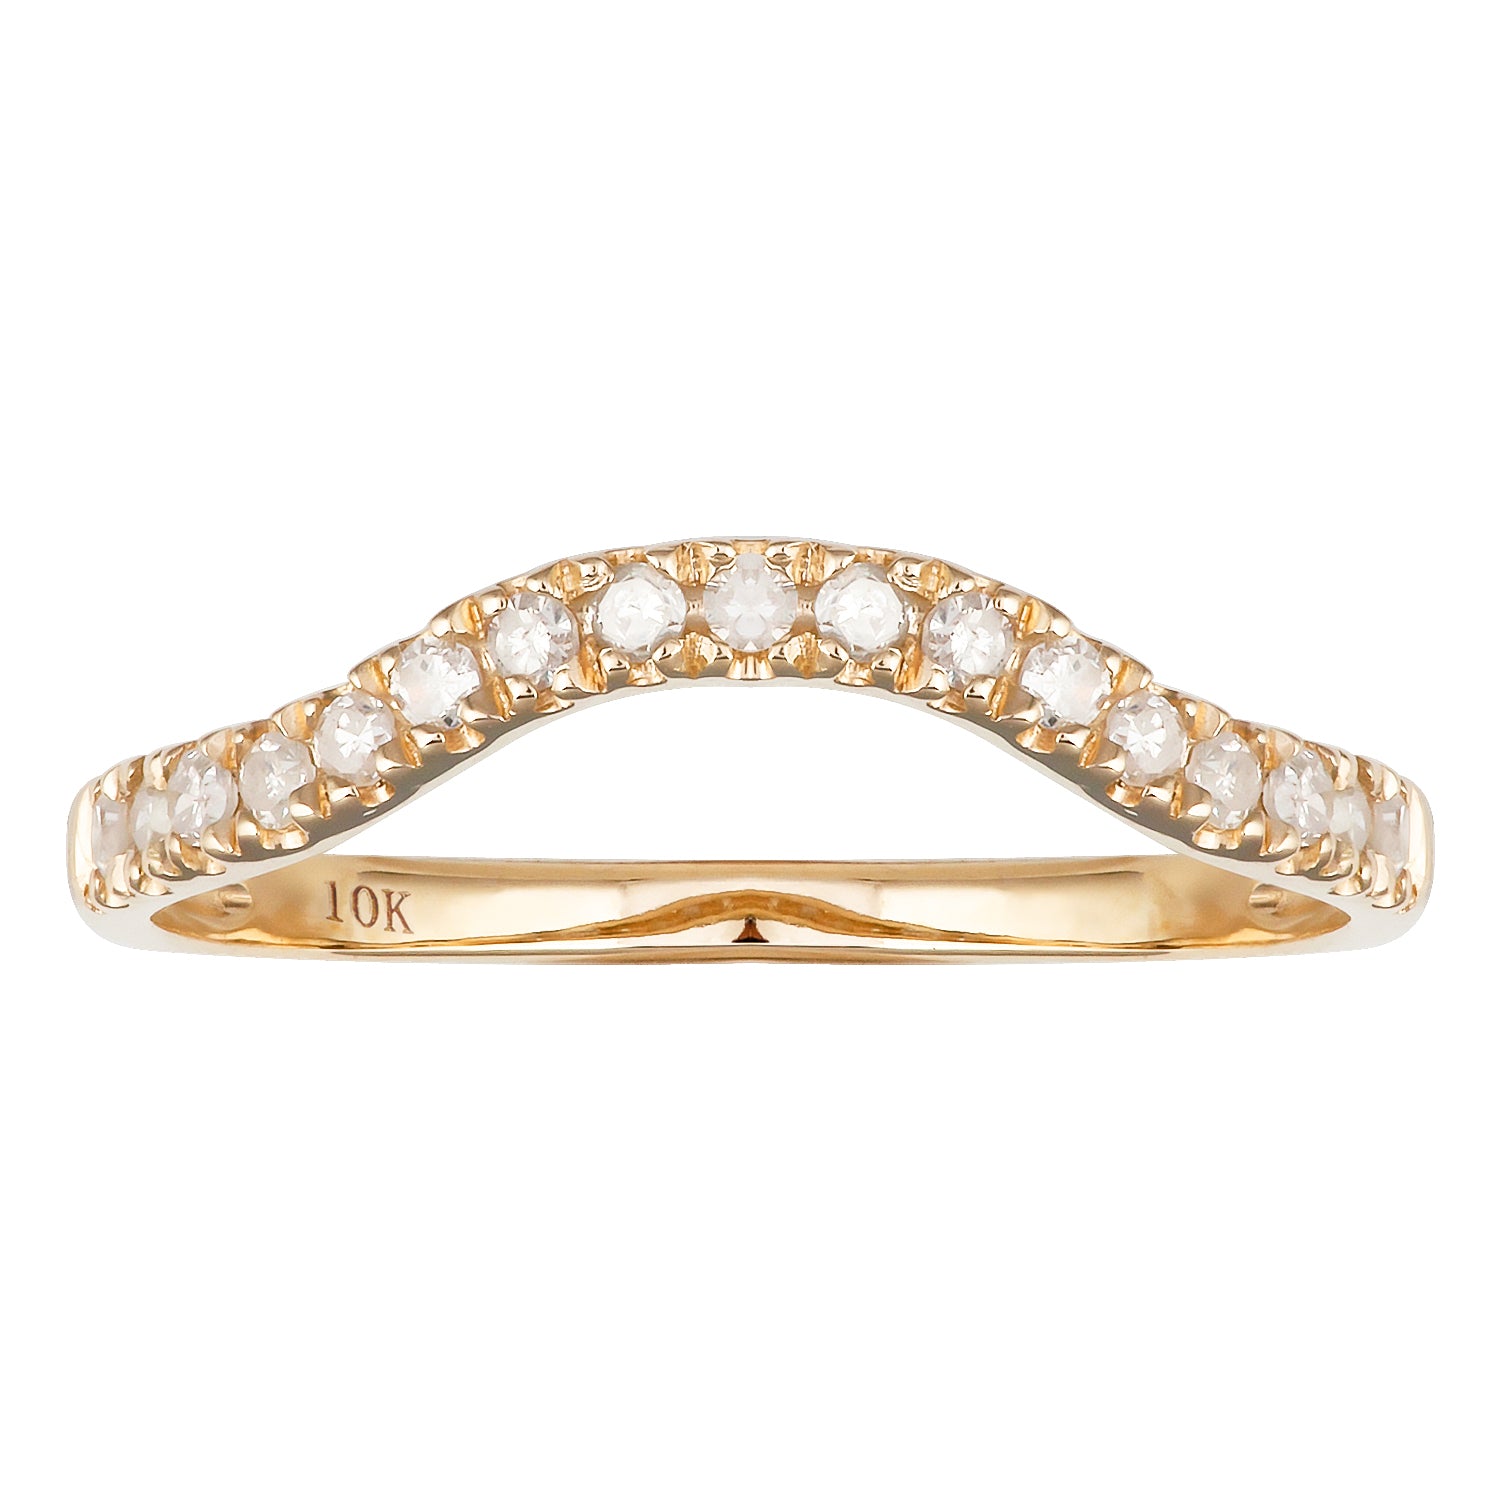 Viducci 10k Yellow Gold Curved Diamond Wedding Band (1/5 cttw, H-I Color, I1-I2 Clarity)